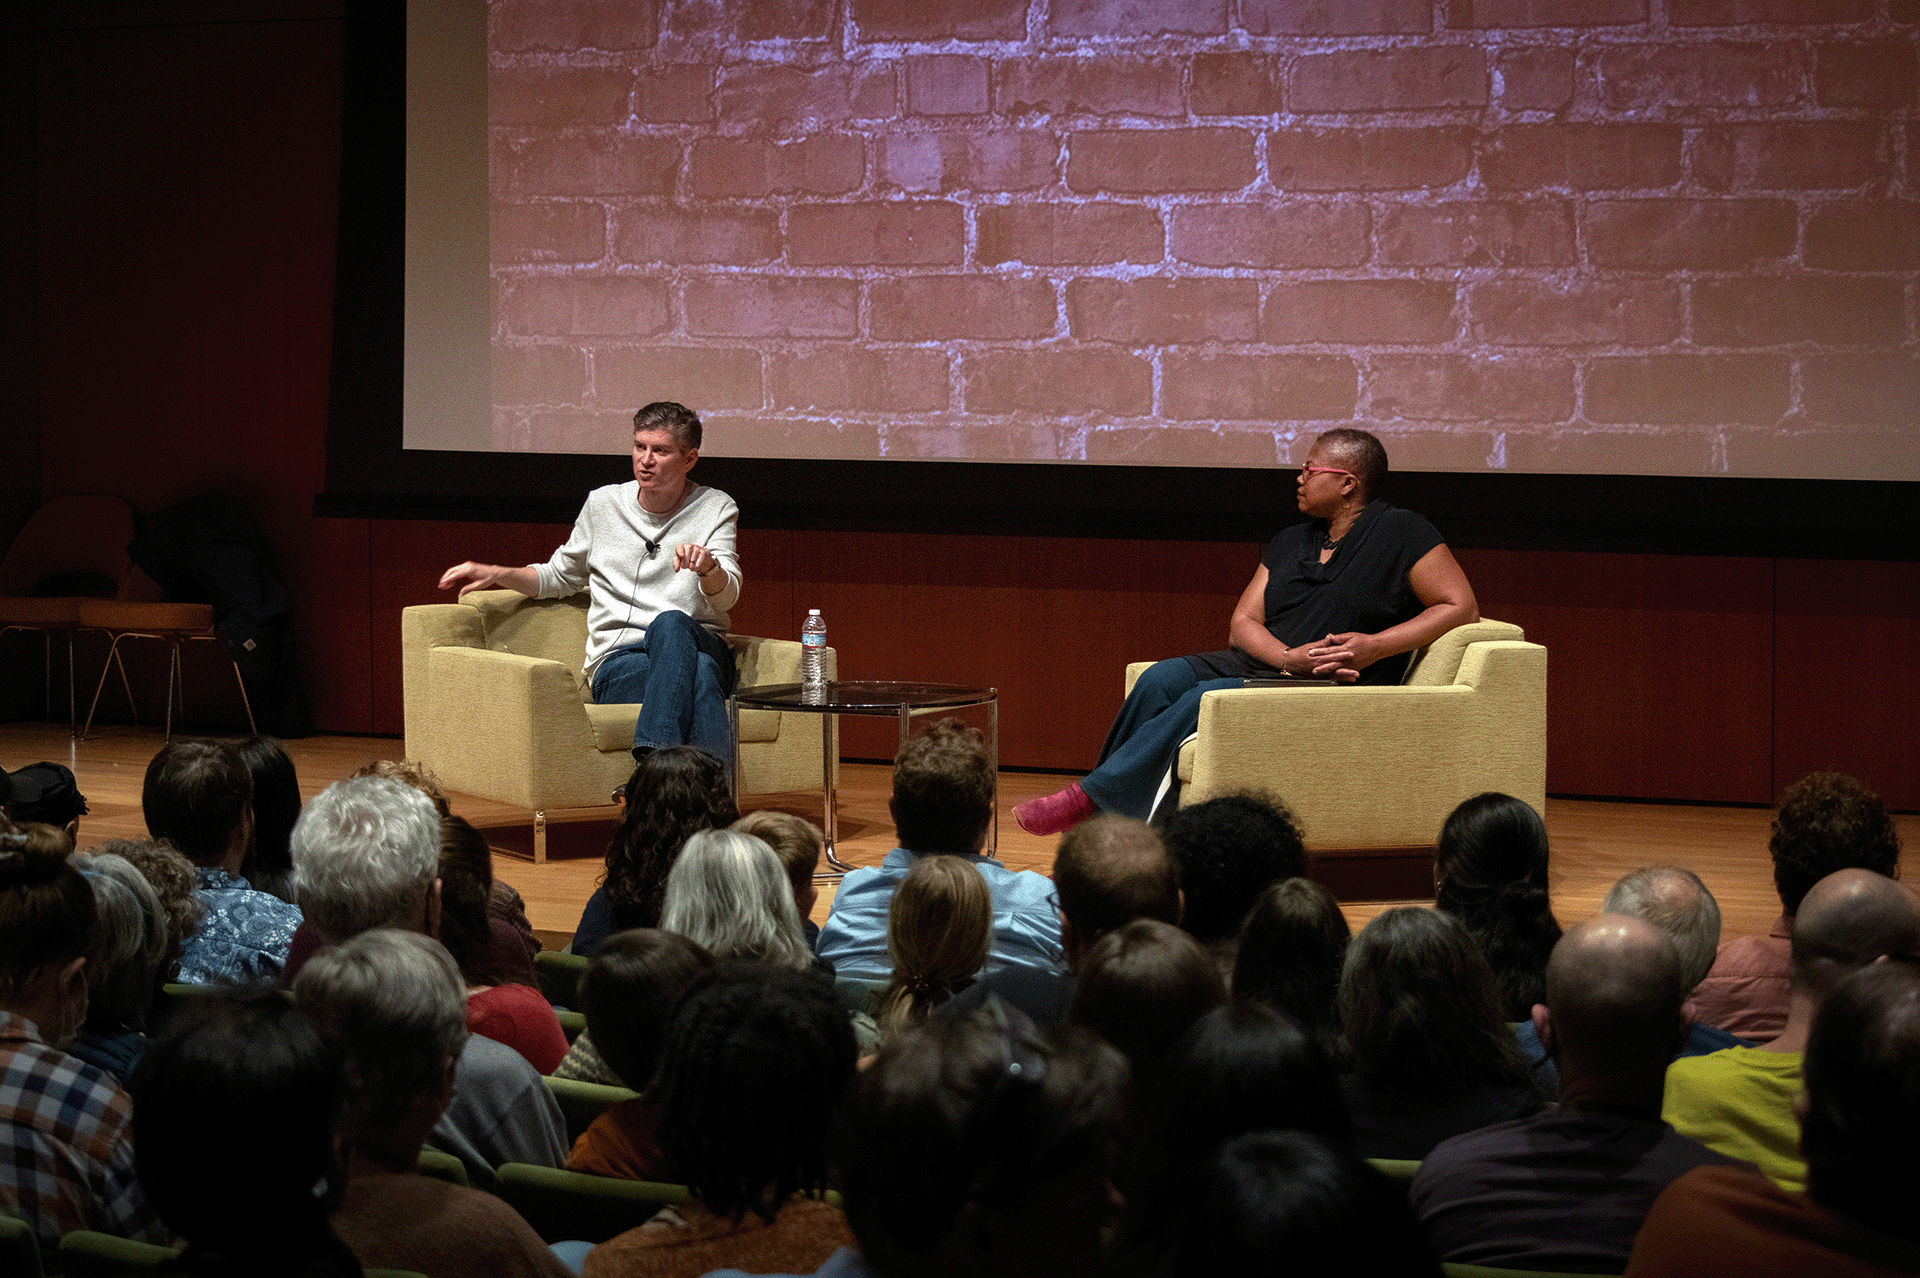 Michael Schur and Adriane Lentz-Smith sit in armchairs on the stage of the Nasher Museum of Art lecture hall in front of a full audience